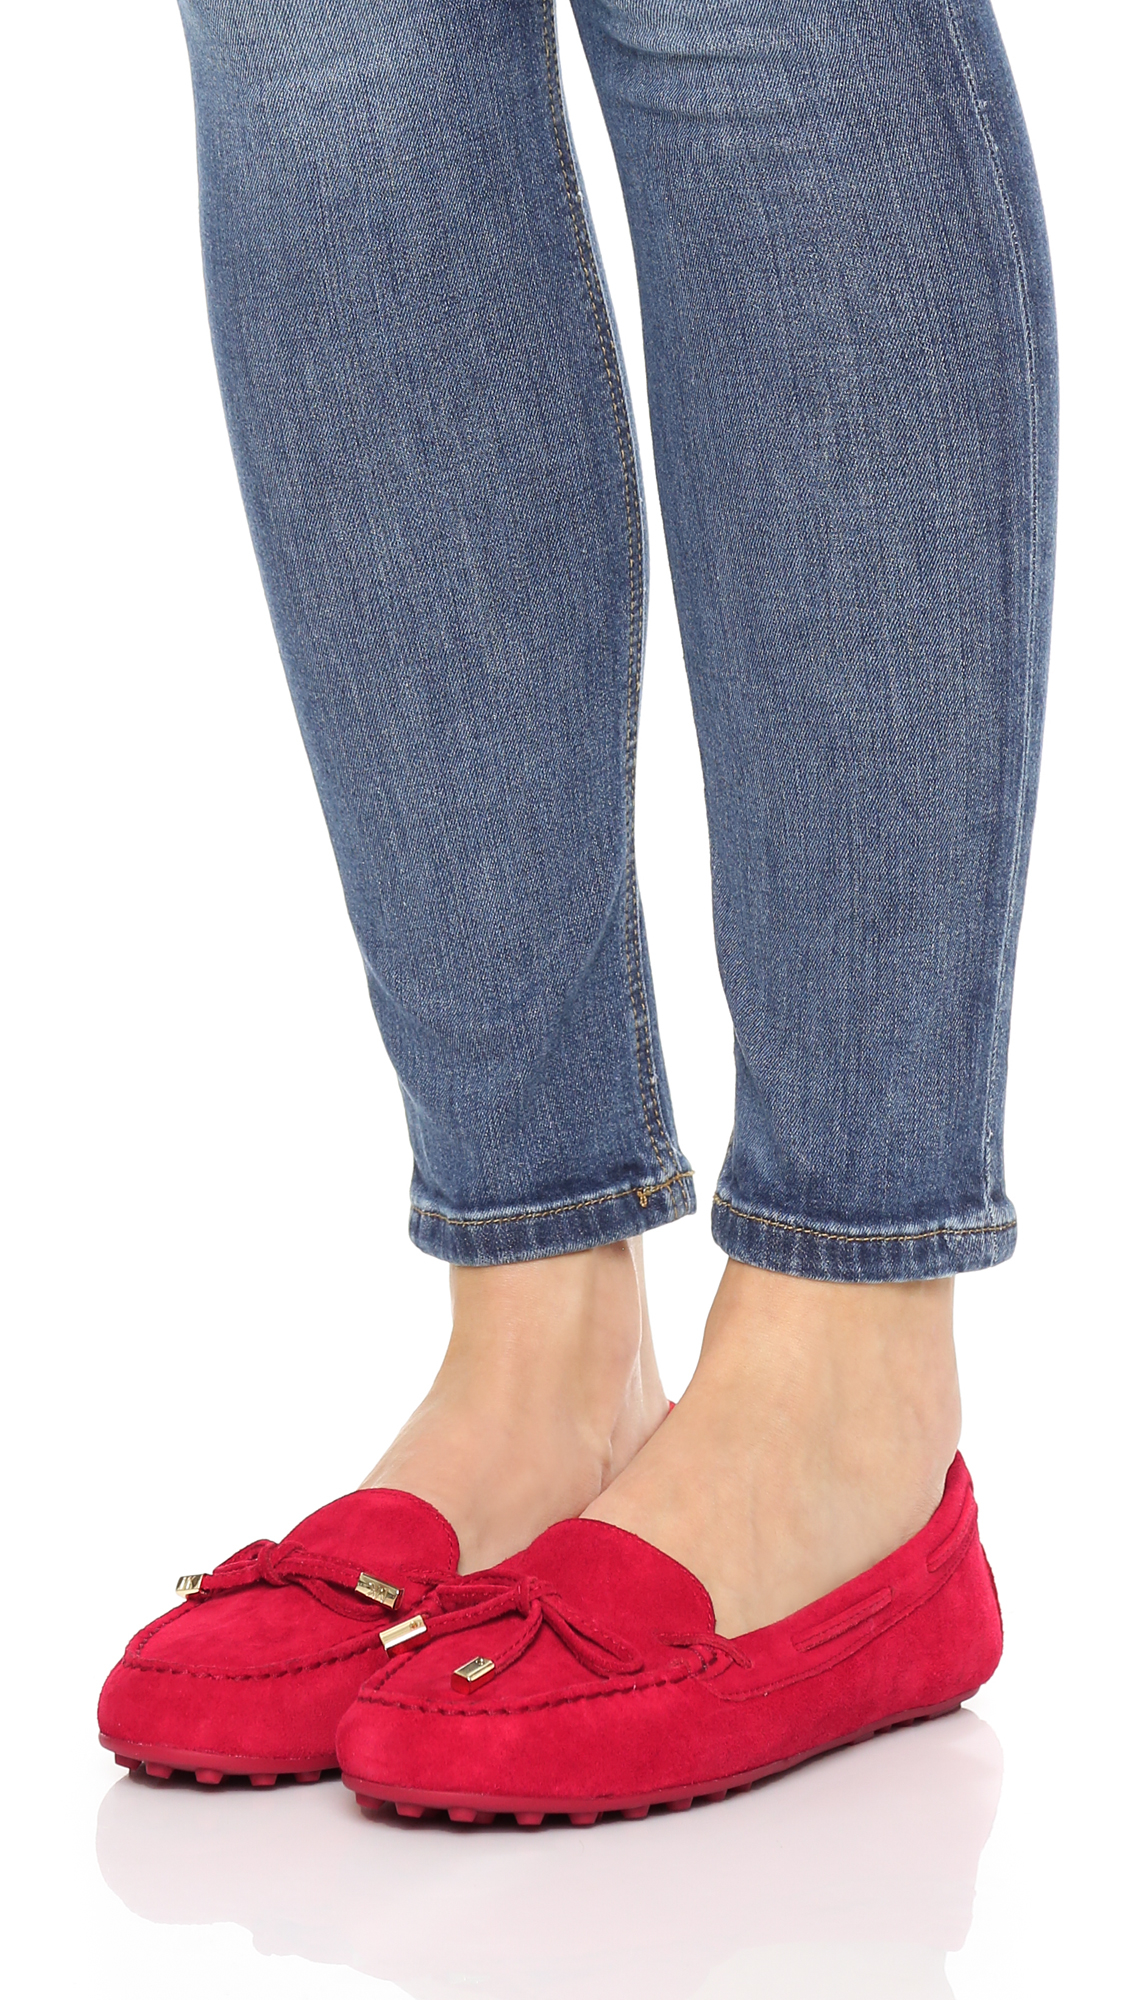 michael kors red loafers